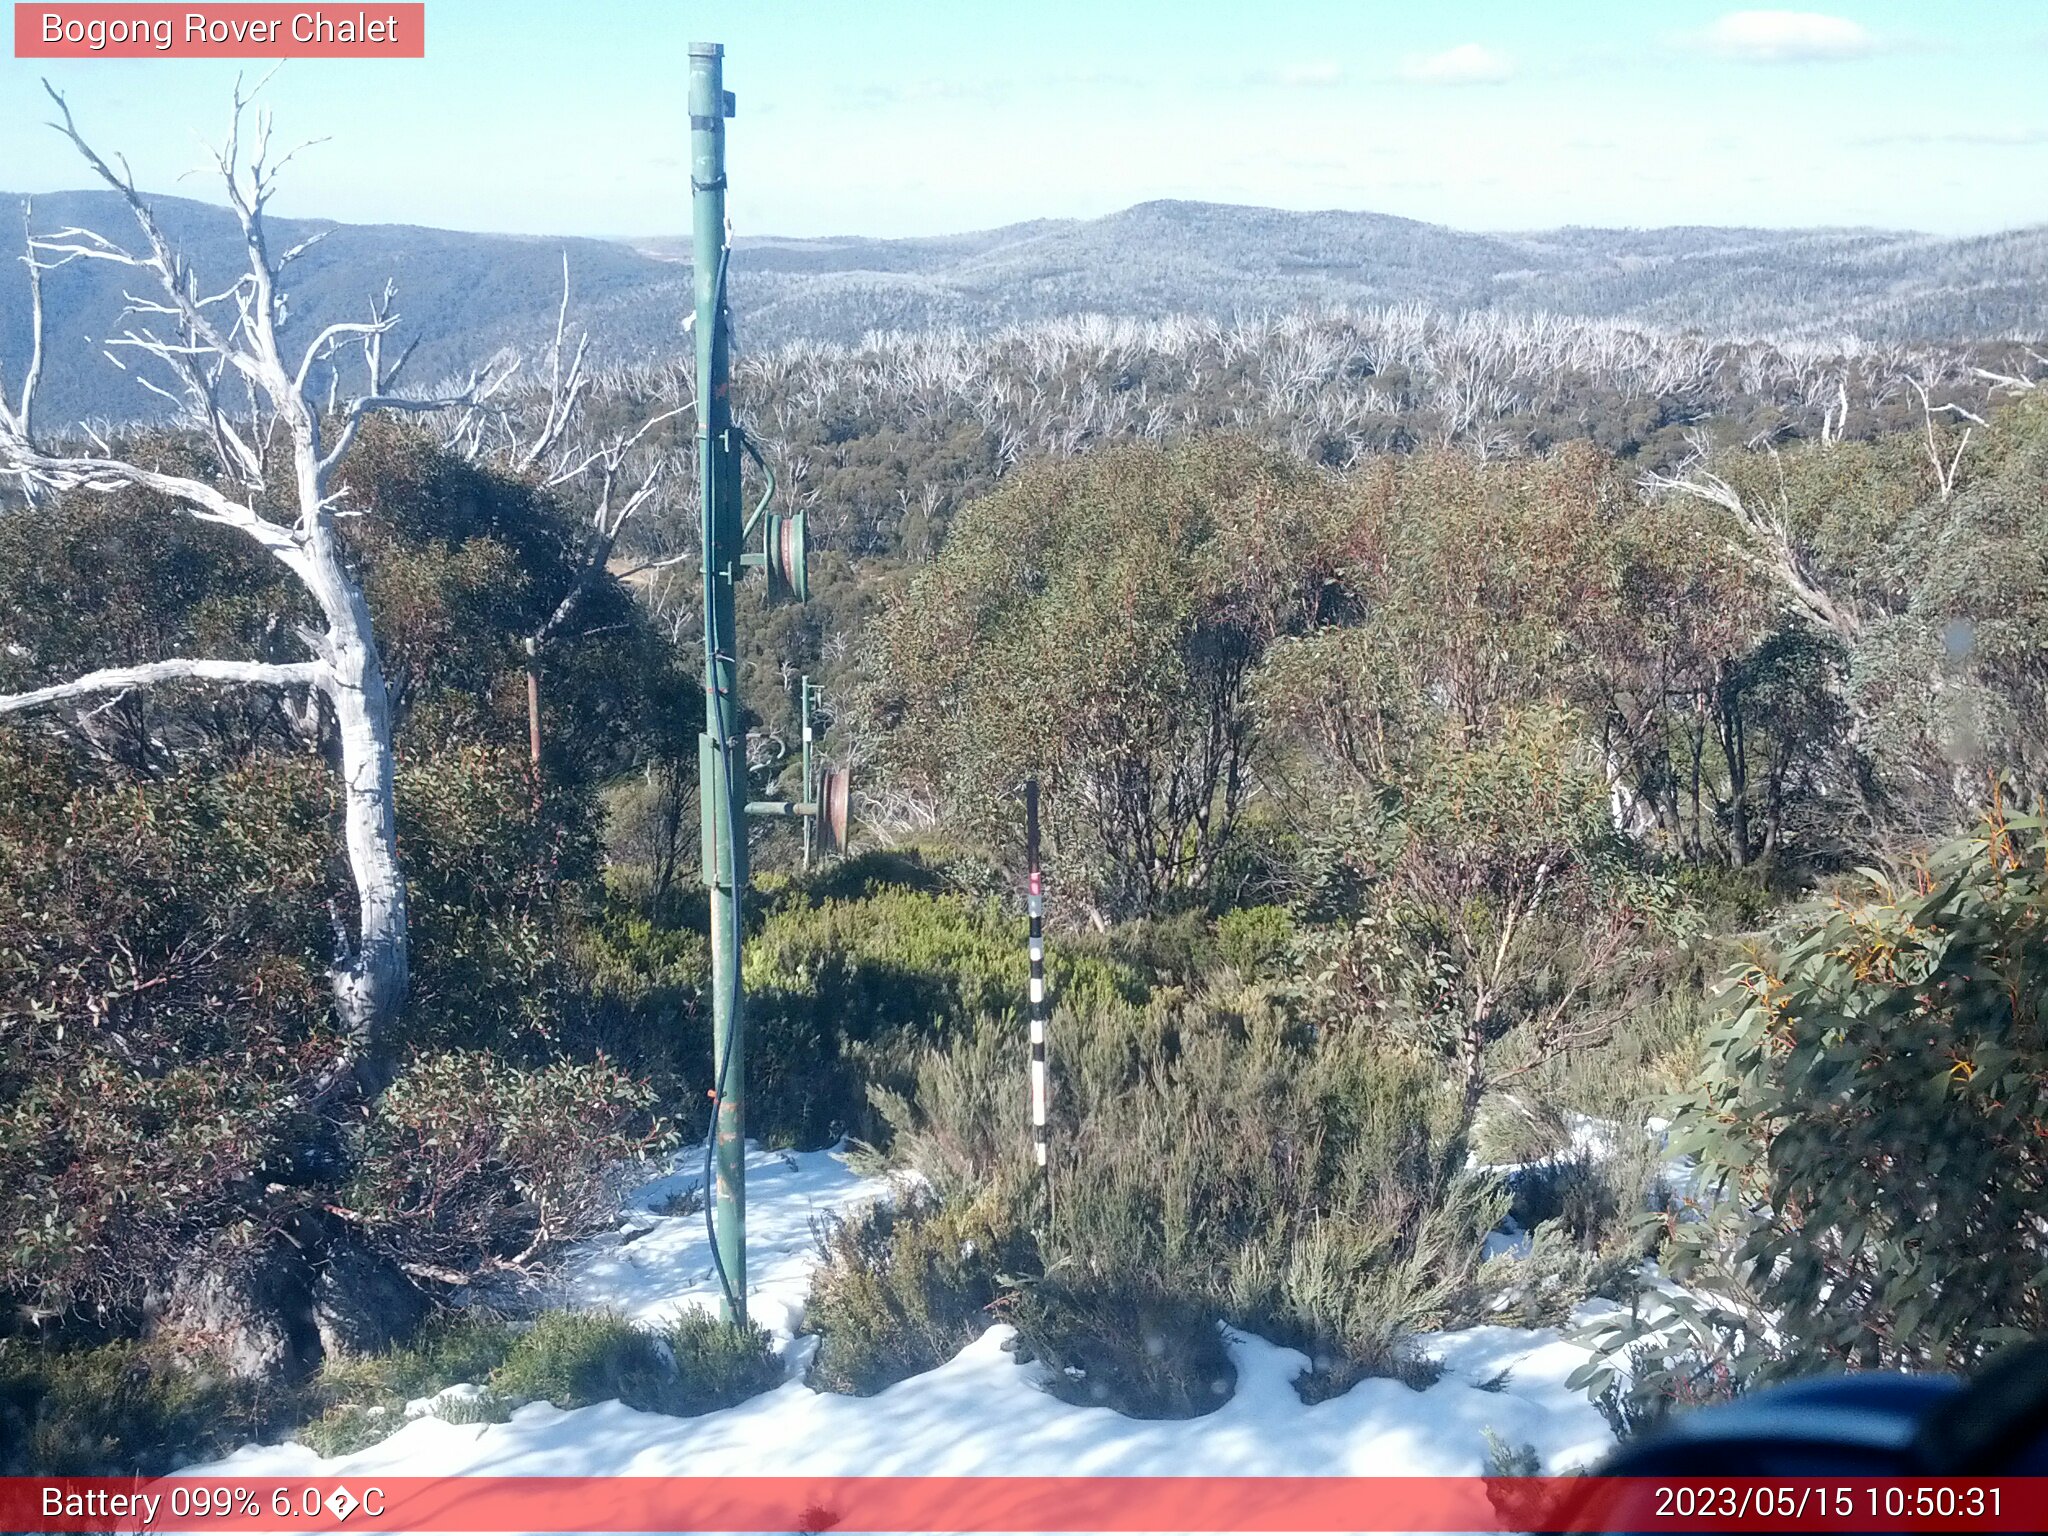 Bogong Web Cam 10:50am Monday 15th of May 2023